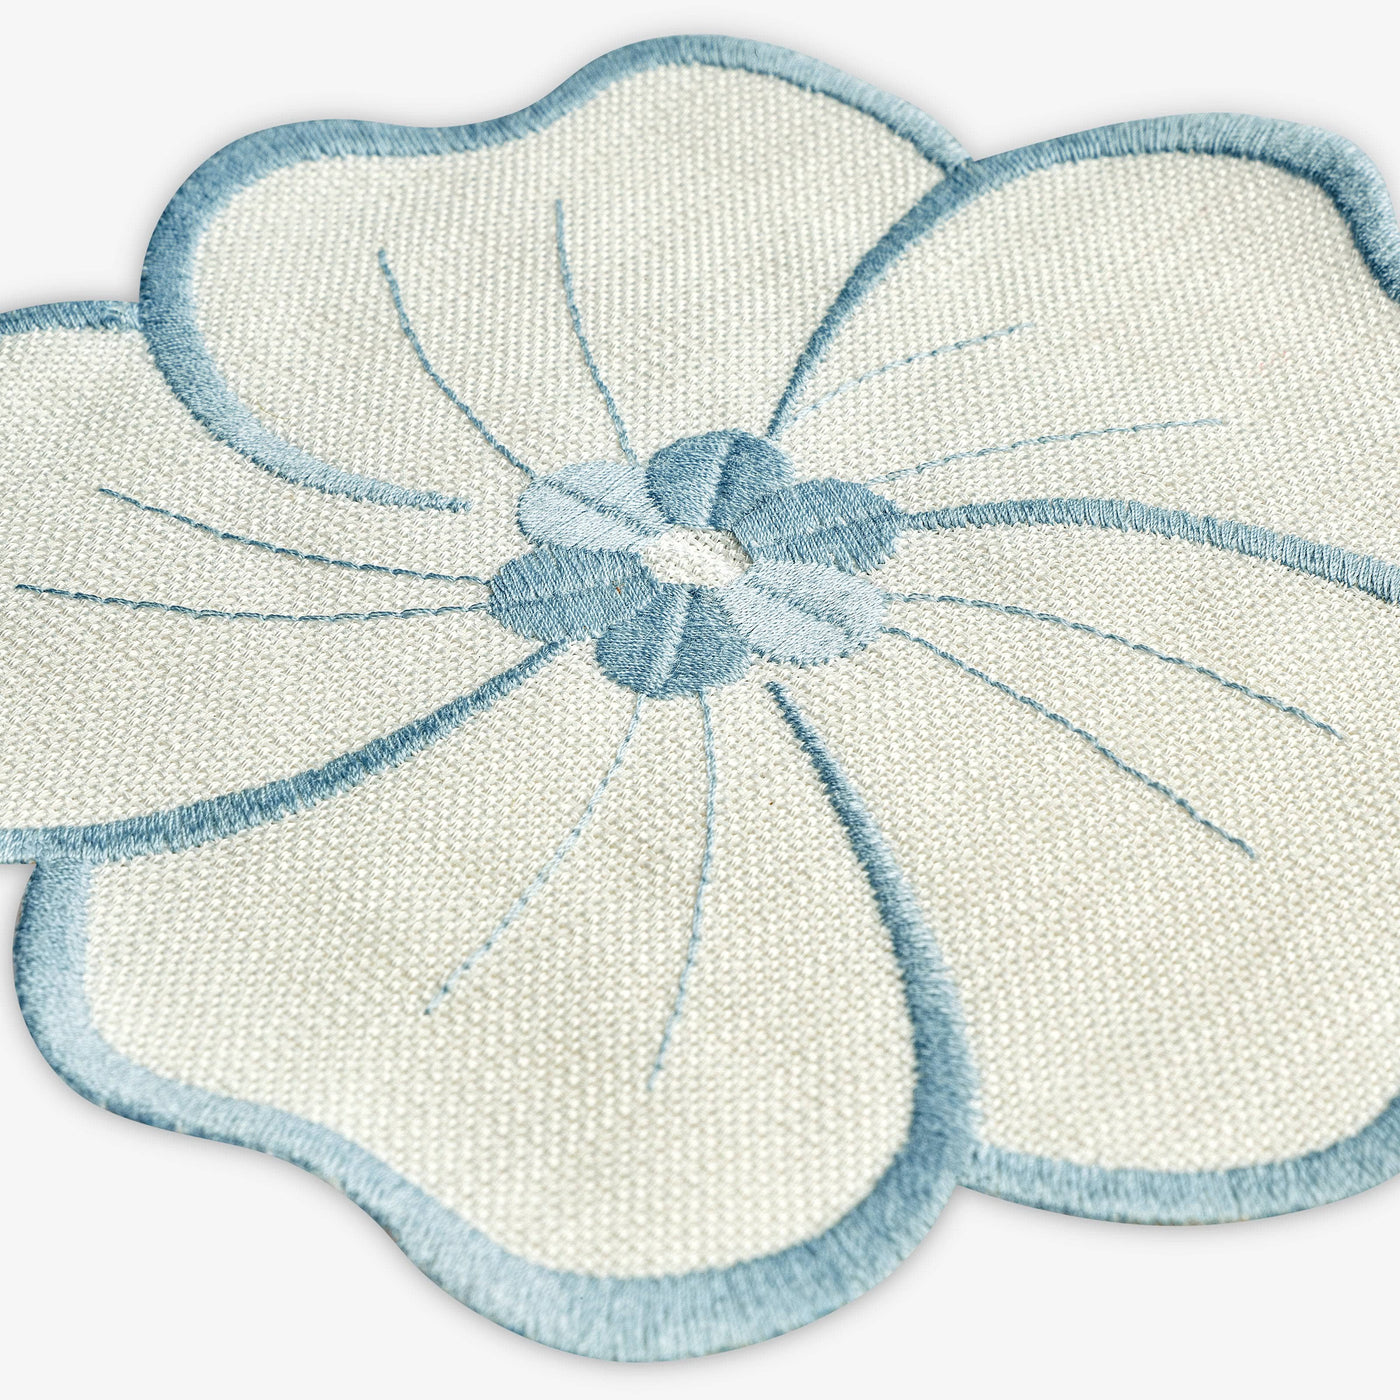 Hannah Set of 6 Embroidered Daisy Coasters, Blue 5